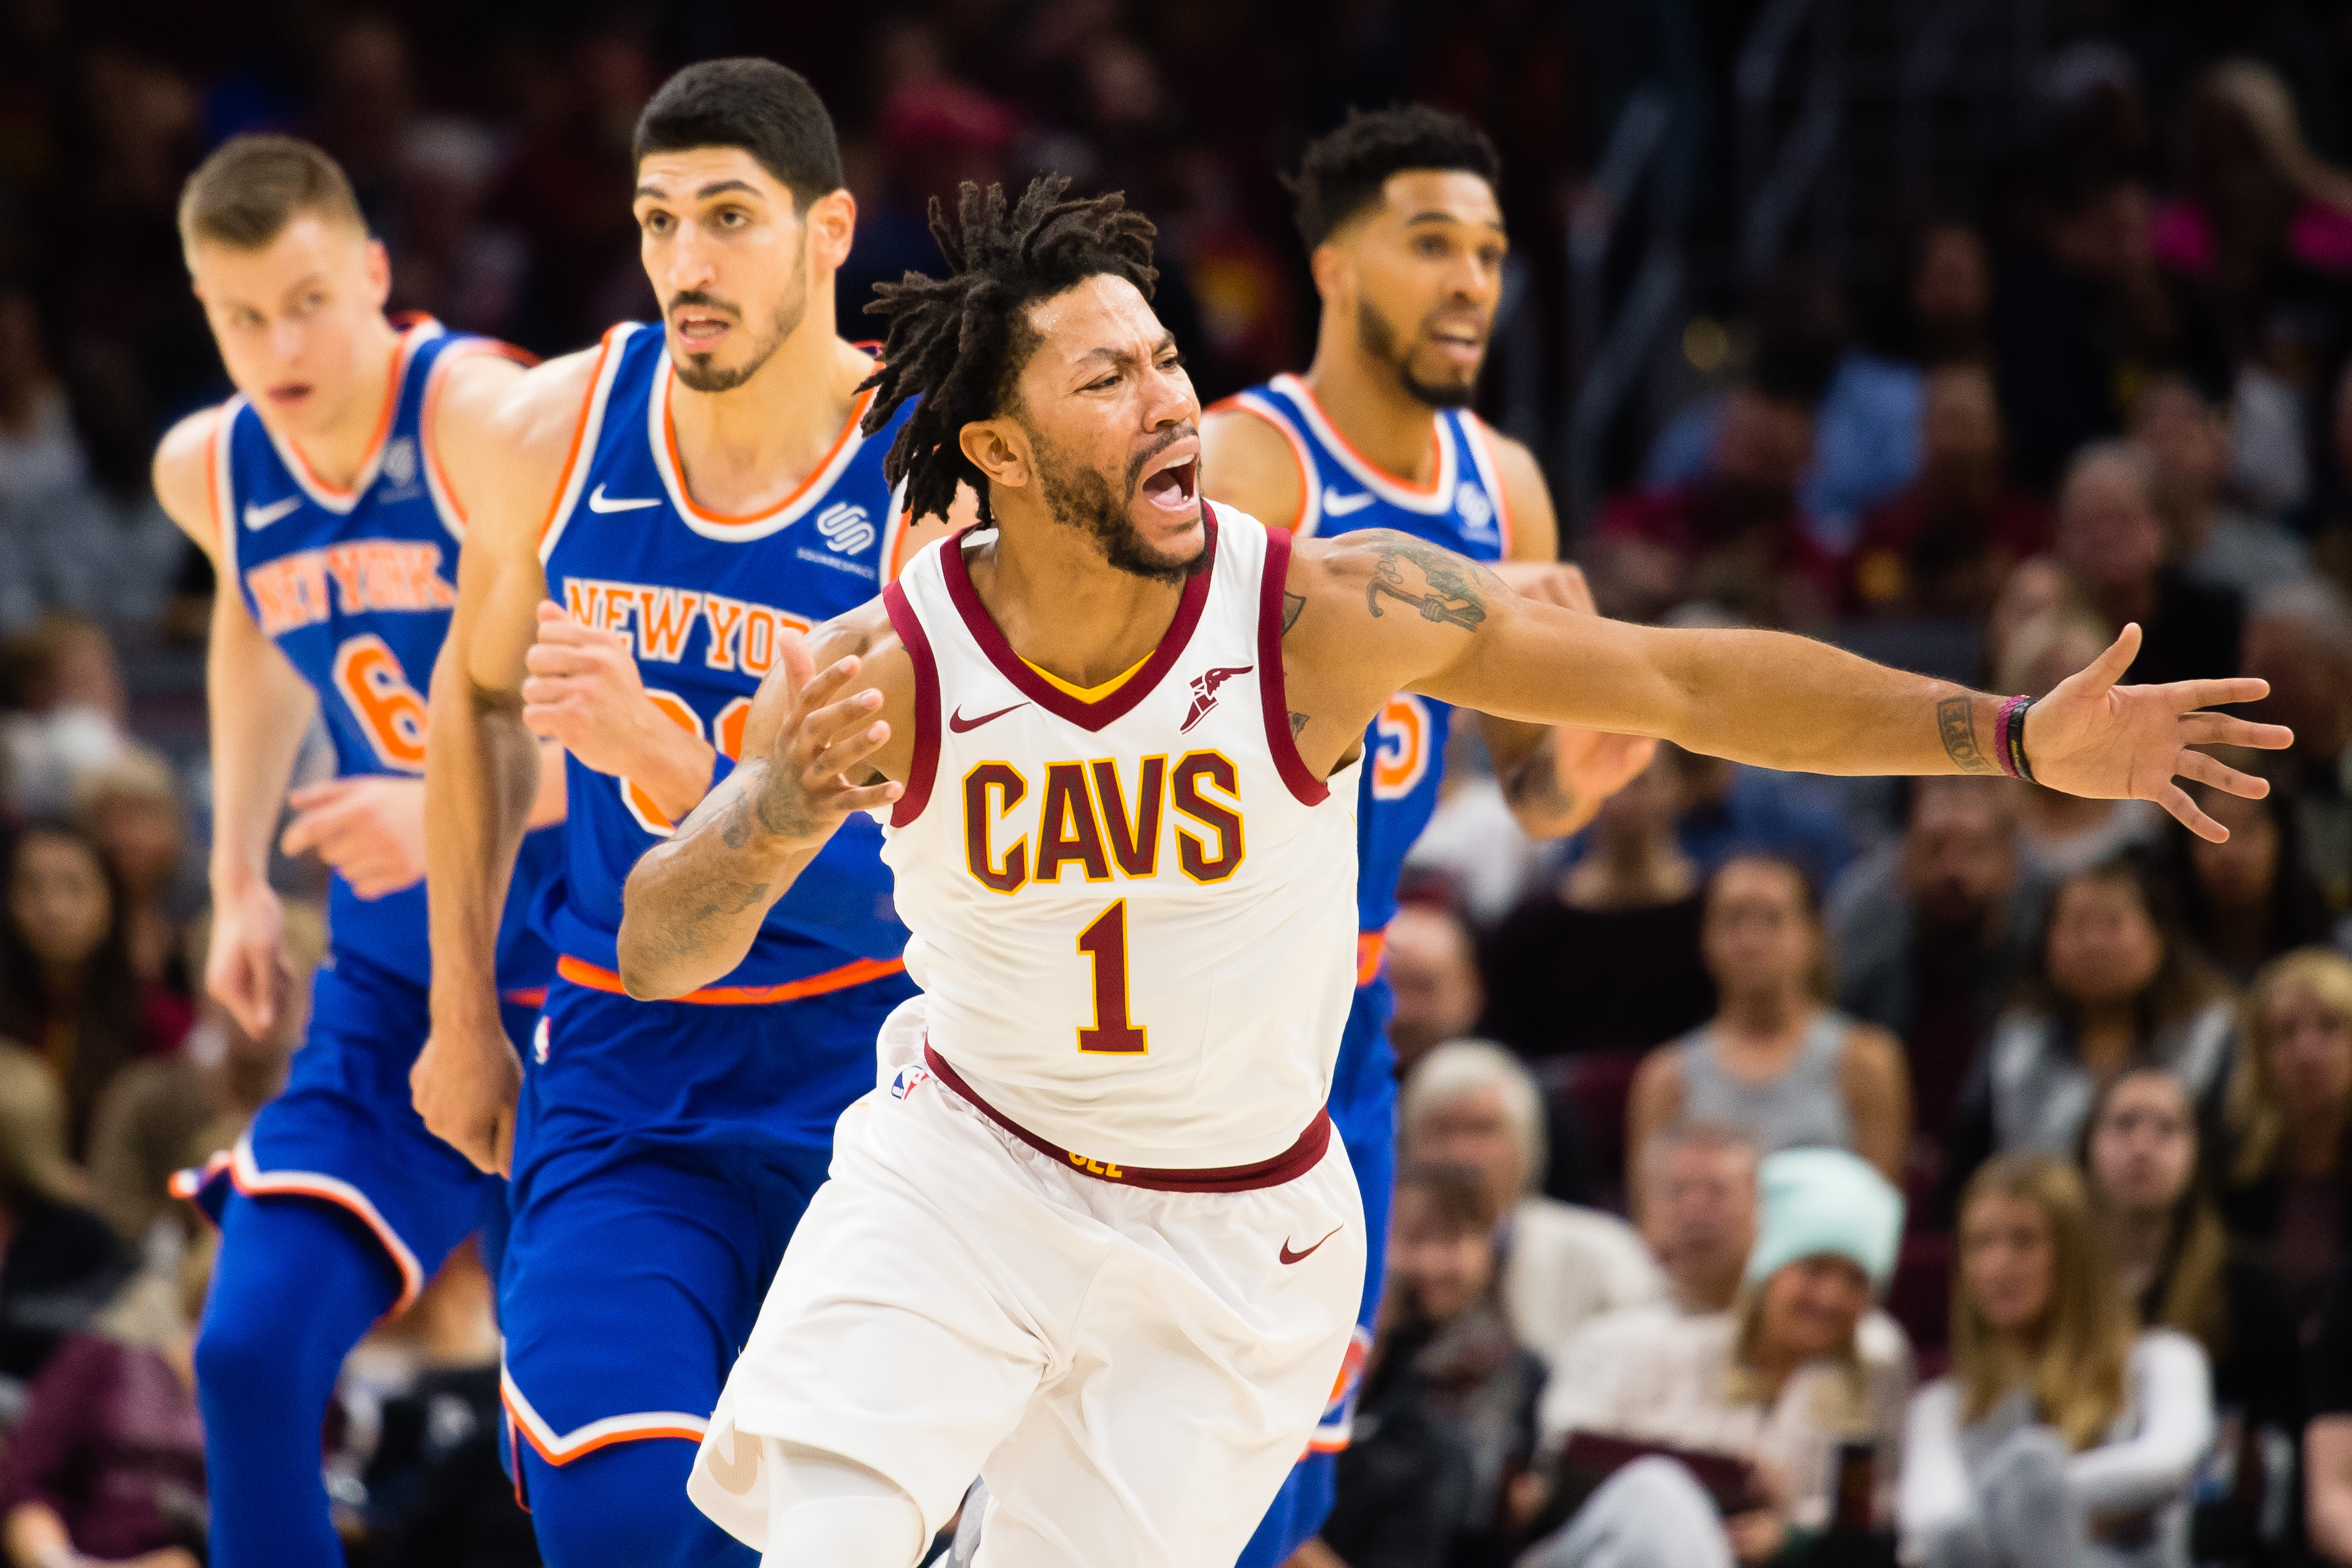 Derrick Rose Speaks on the Past, Present and Future